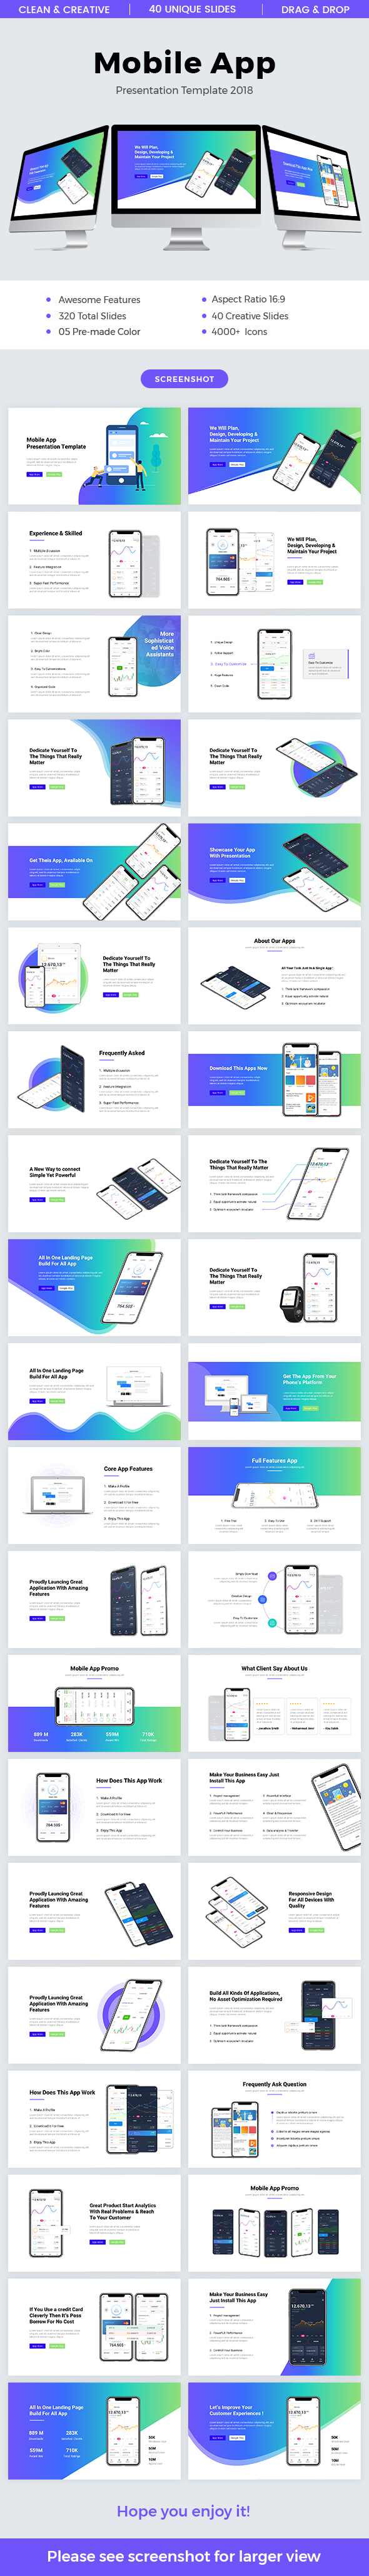 Mobile App Presentation Template from previews.customer.envatousercontent.com